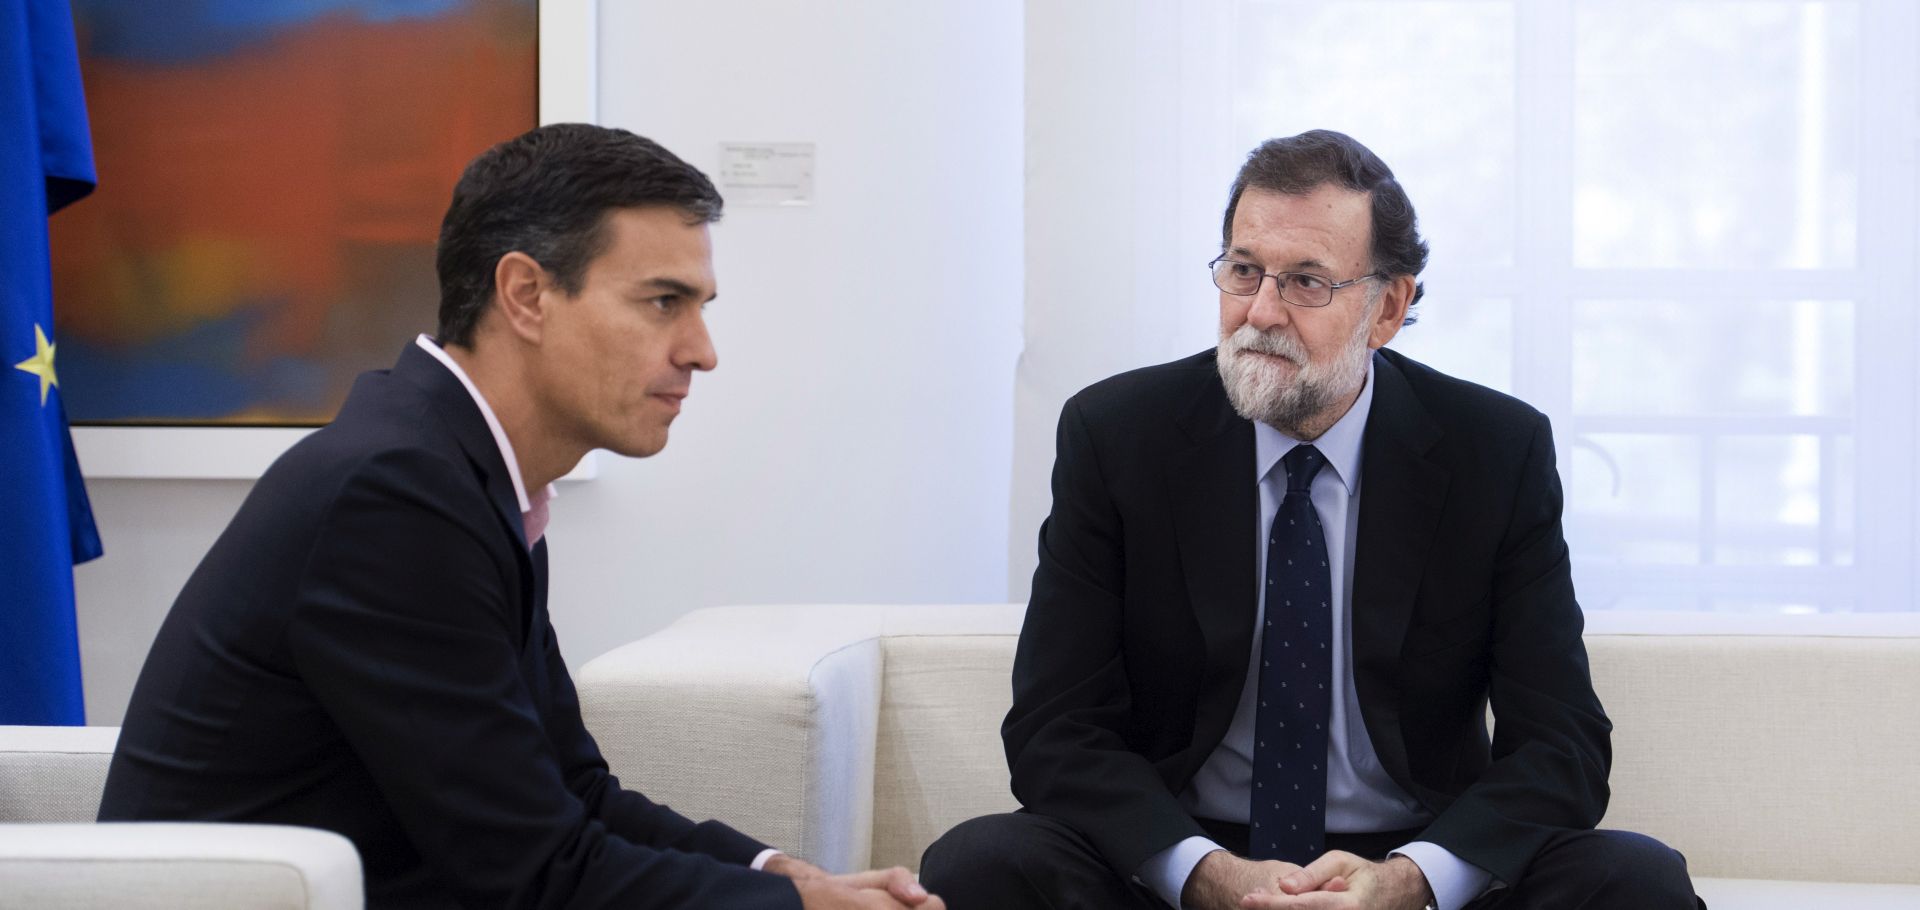 epa06240207 Spanish Prime Minister Mariano Rajoy (R) talks with PSOE party leader Pedro Sanchez (L), during their meeting on the '1-O Referendum' held the previous day, at La Moncloa Palace, in Madrid, Spain, 02 October 2017. Catalan President Puigdemont has asked for an 'international mediation' to deal with the current situation in Catalonia and claimed for the 'withdrawal of the police forces' deployed in the region. Catalonia held on 01 October an independence referendum, that was celebrated in spite of it had been banned by the Constitutional Court, ending with clashes between police and pro-independence people. A day after of the illegal referendum, a high tension atmosphere is present between the Catalan Government and the Spanish central Government with an open door to a possible unilateral declaration of independence by the Catalan Government.  EPA/LUCA PIERGIOVANNI